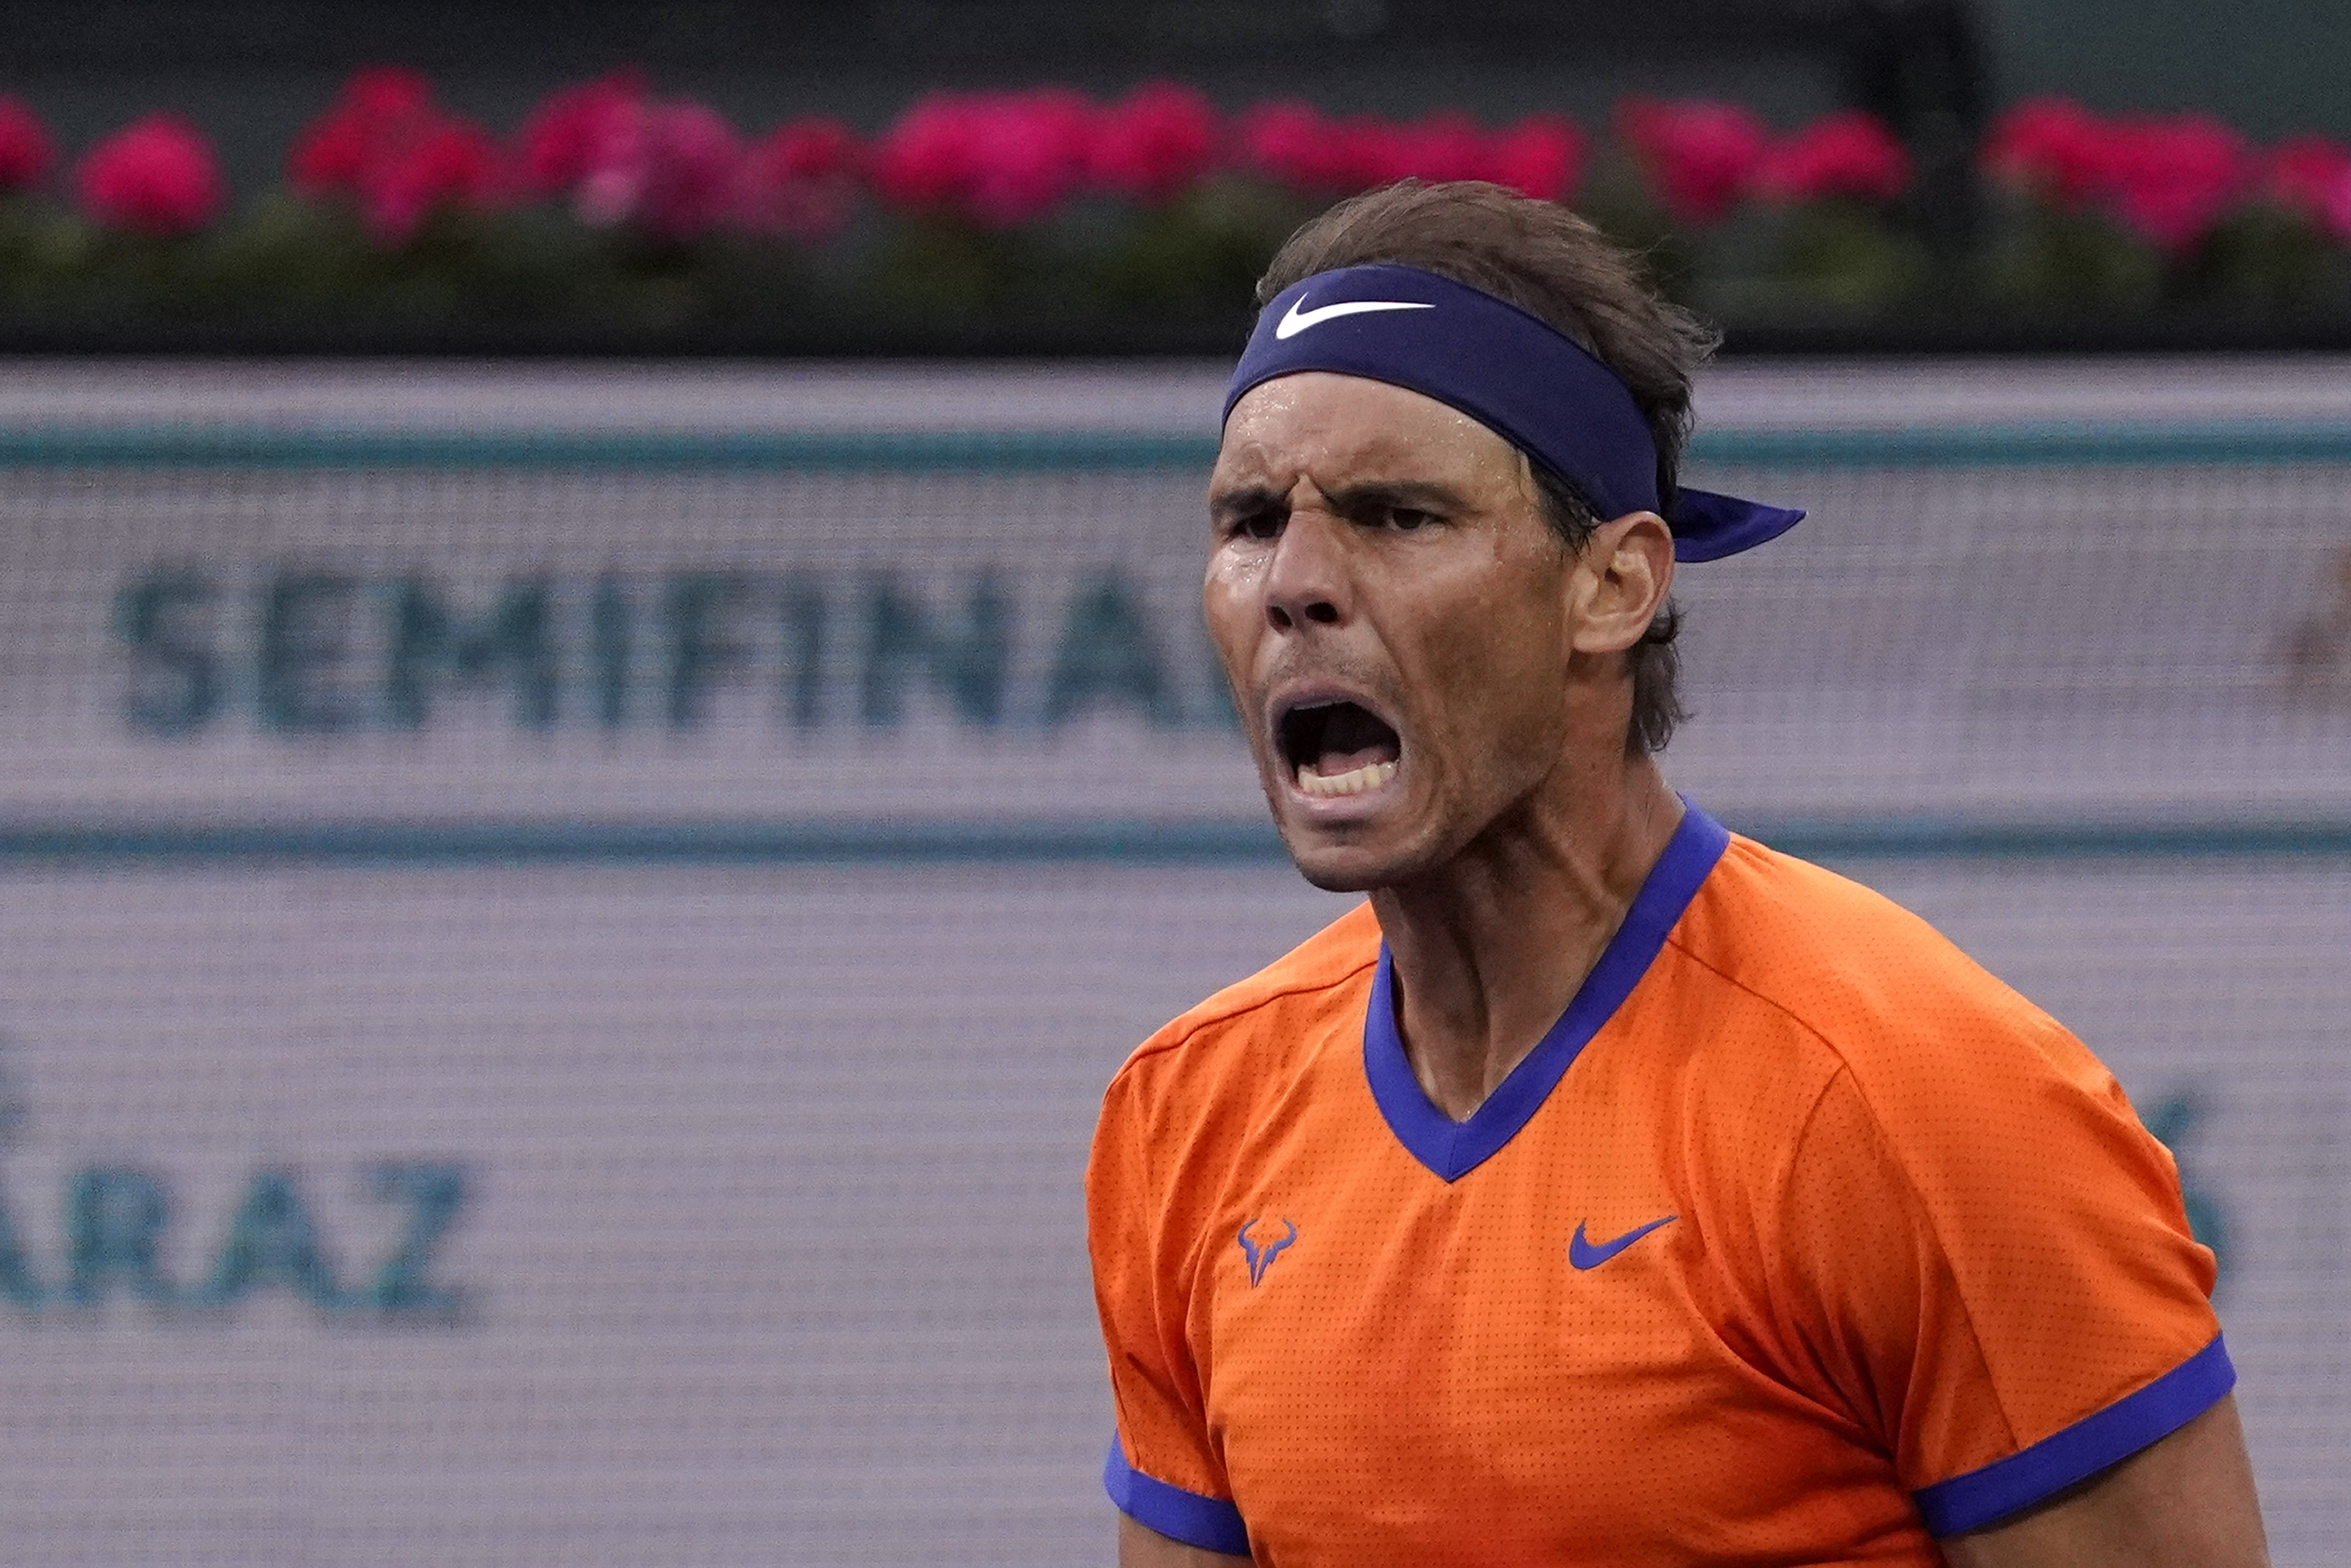 Rafael Nadal survives Carlos Alcaraz and swirling wind over three-plus hours in moving to 20-0 on the year